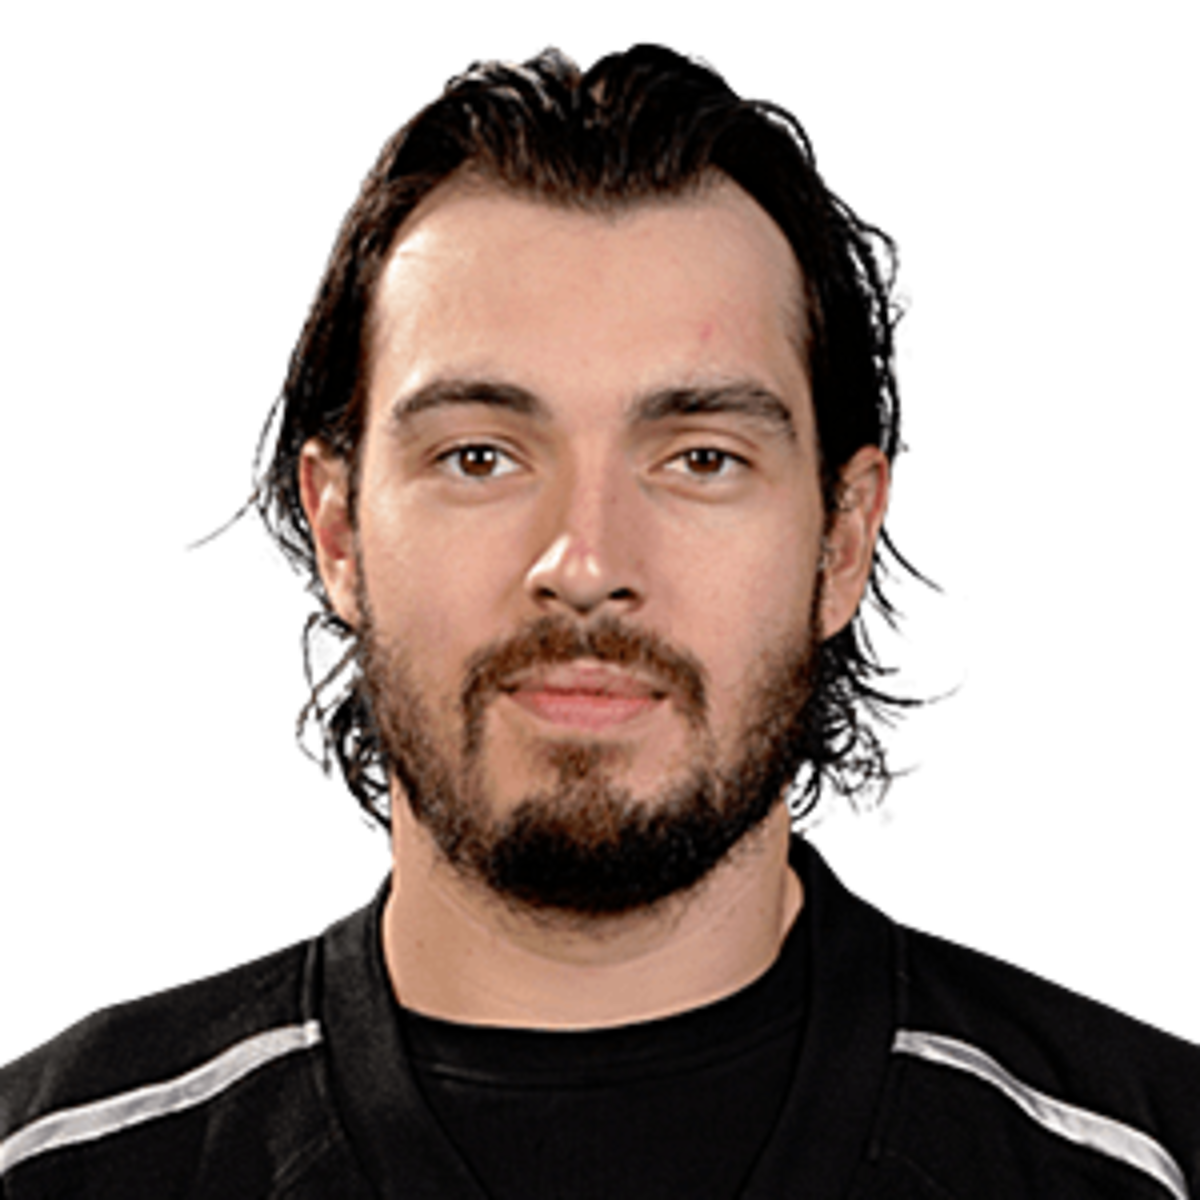 Drew Doughty - Stats & Facts - Elite Prospects